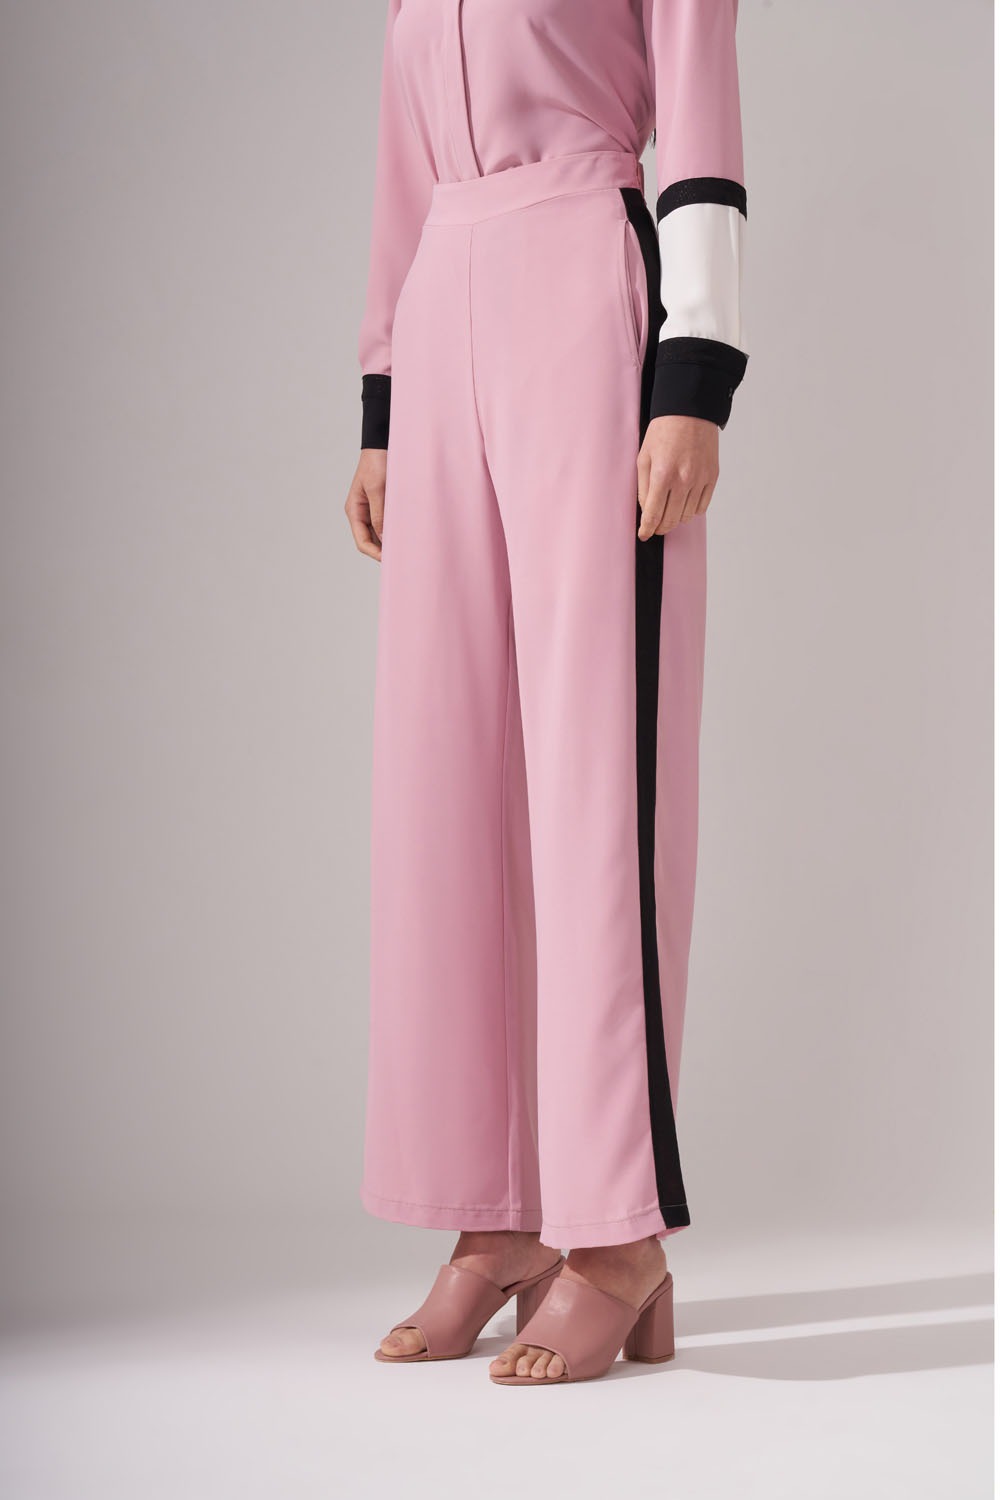 Silvery Banded Trousers (Dusty Rose)